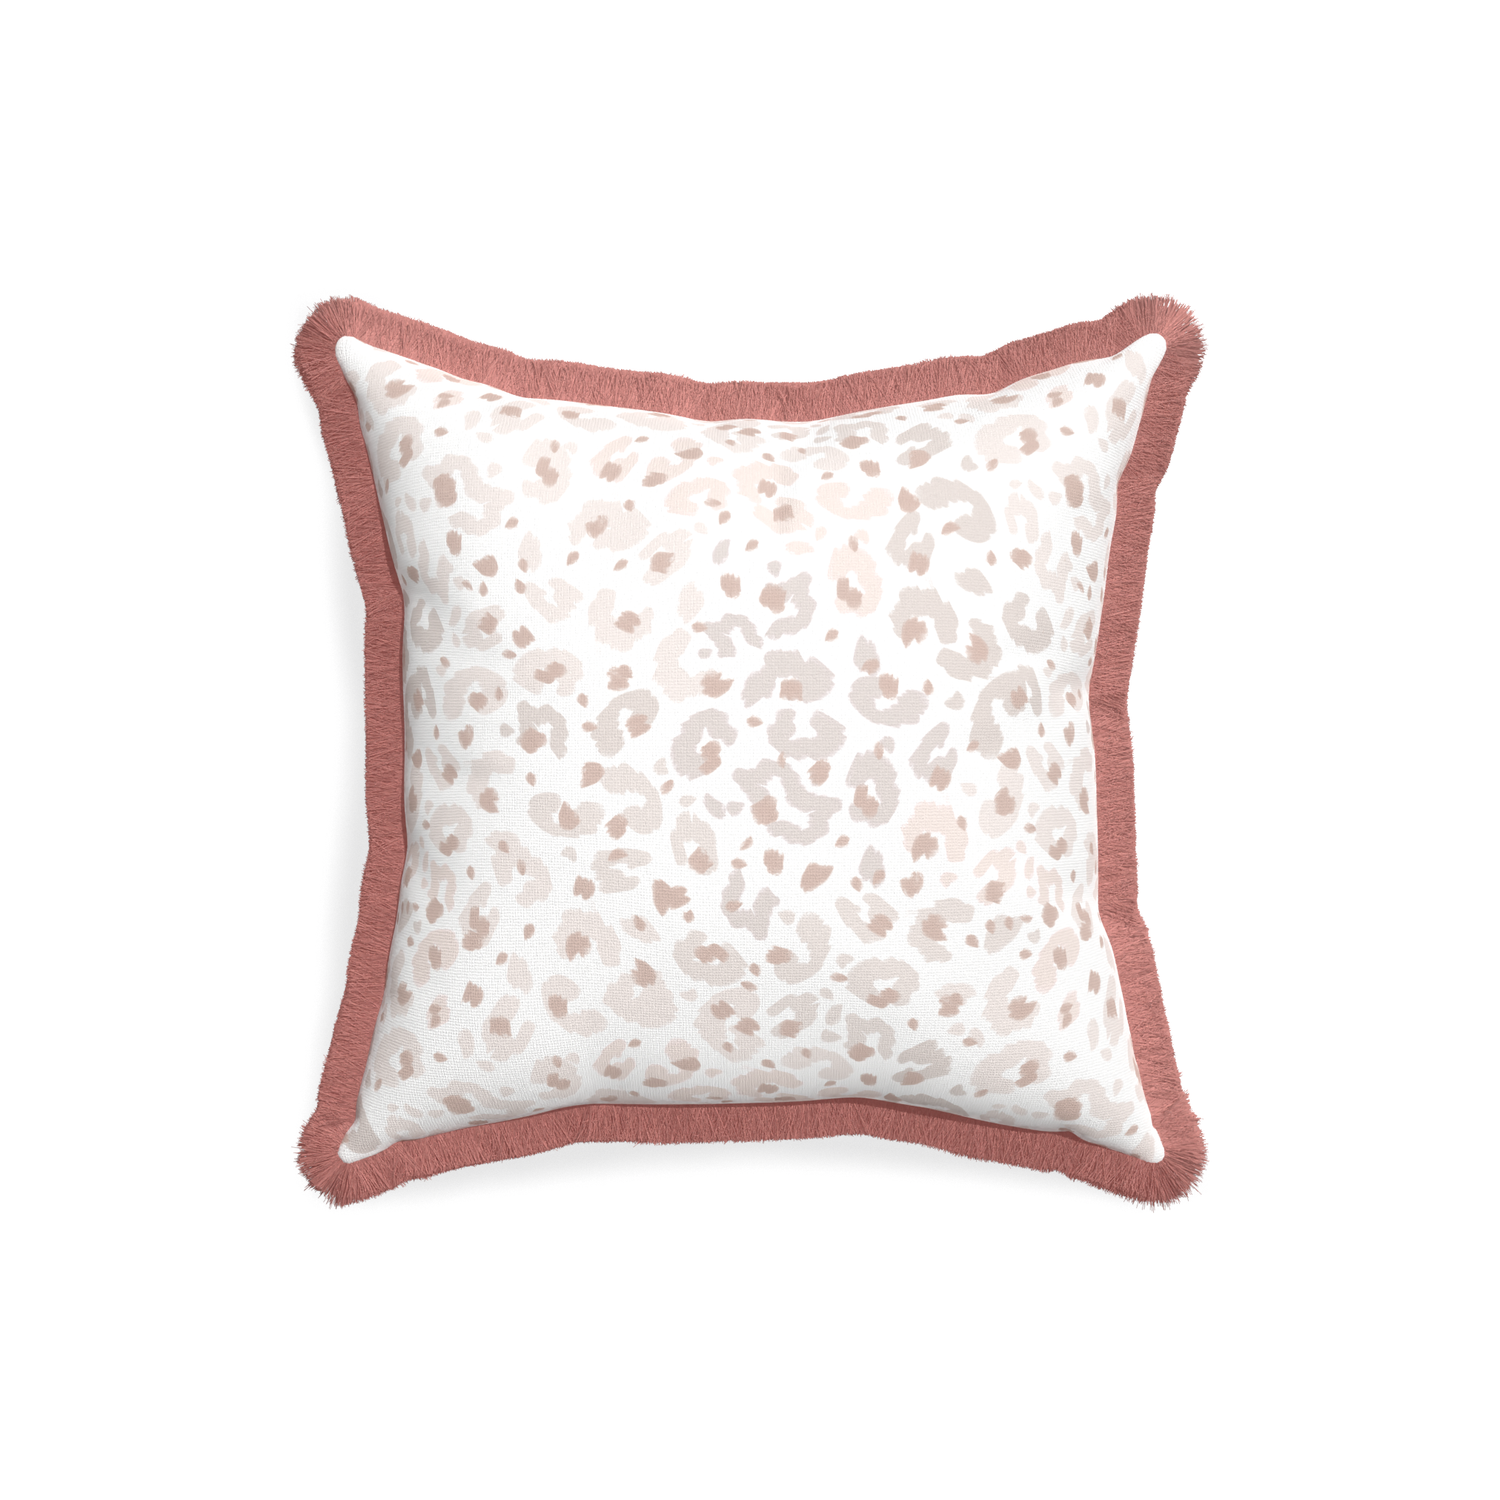 18-square rosie custom beige animal printpillow with d fringe on white background